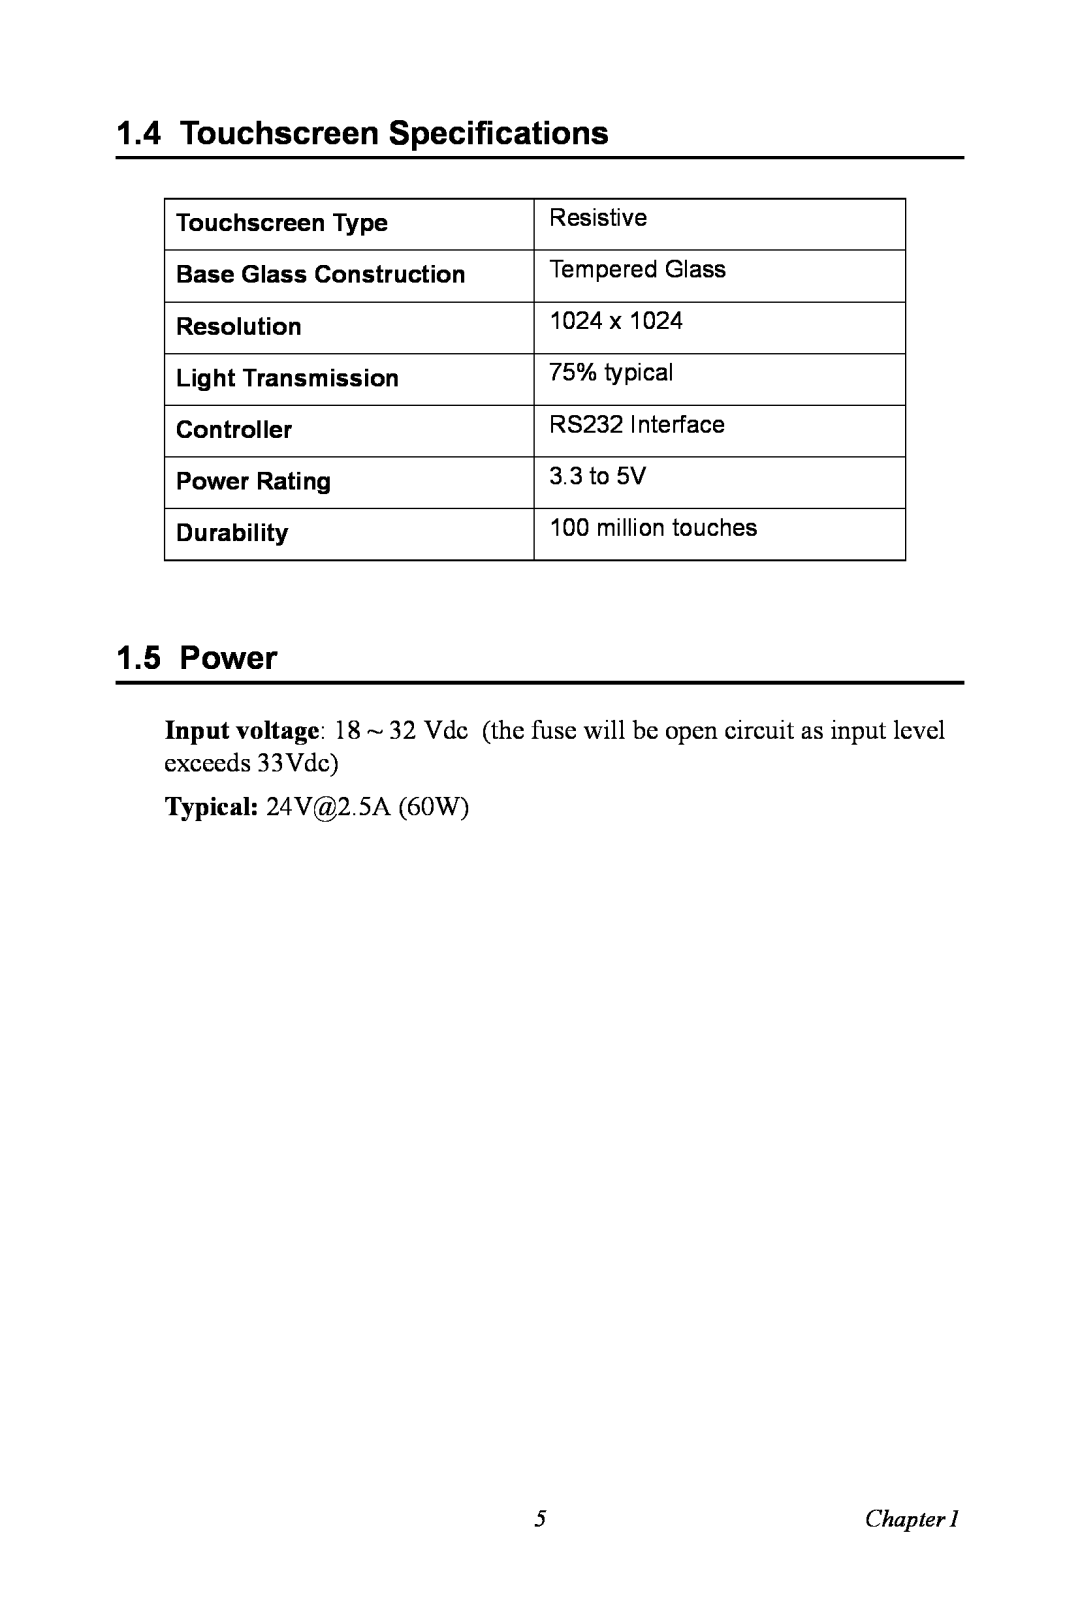 Intel TPC-1070 user manual Touchscreen Specifications, Power, Typical 24V@2.5A 60W 